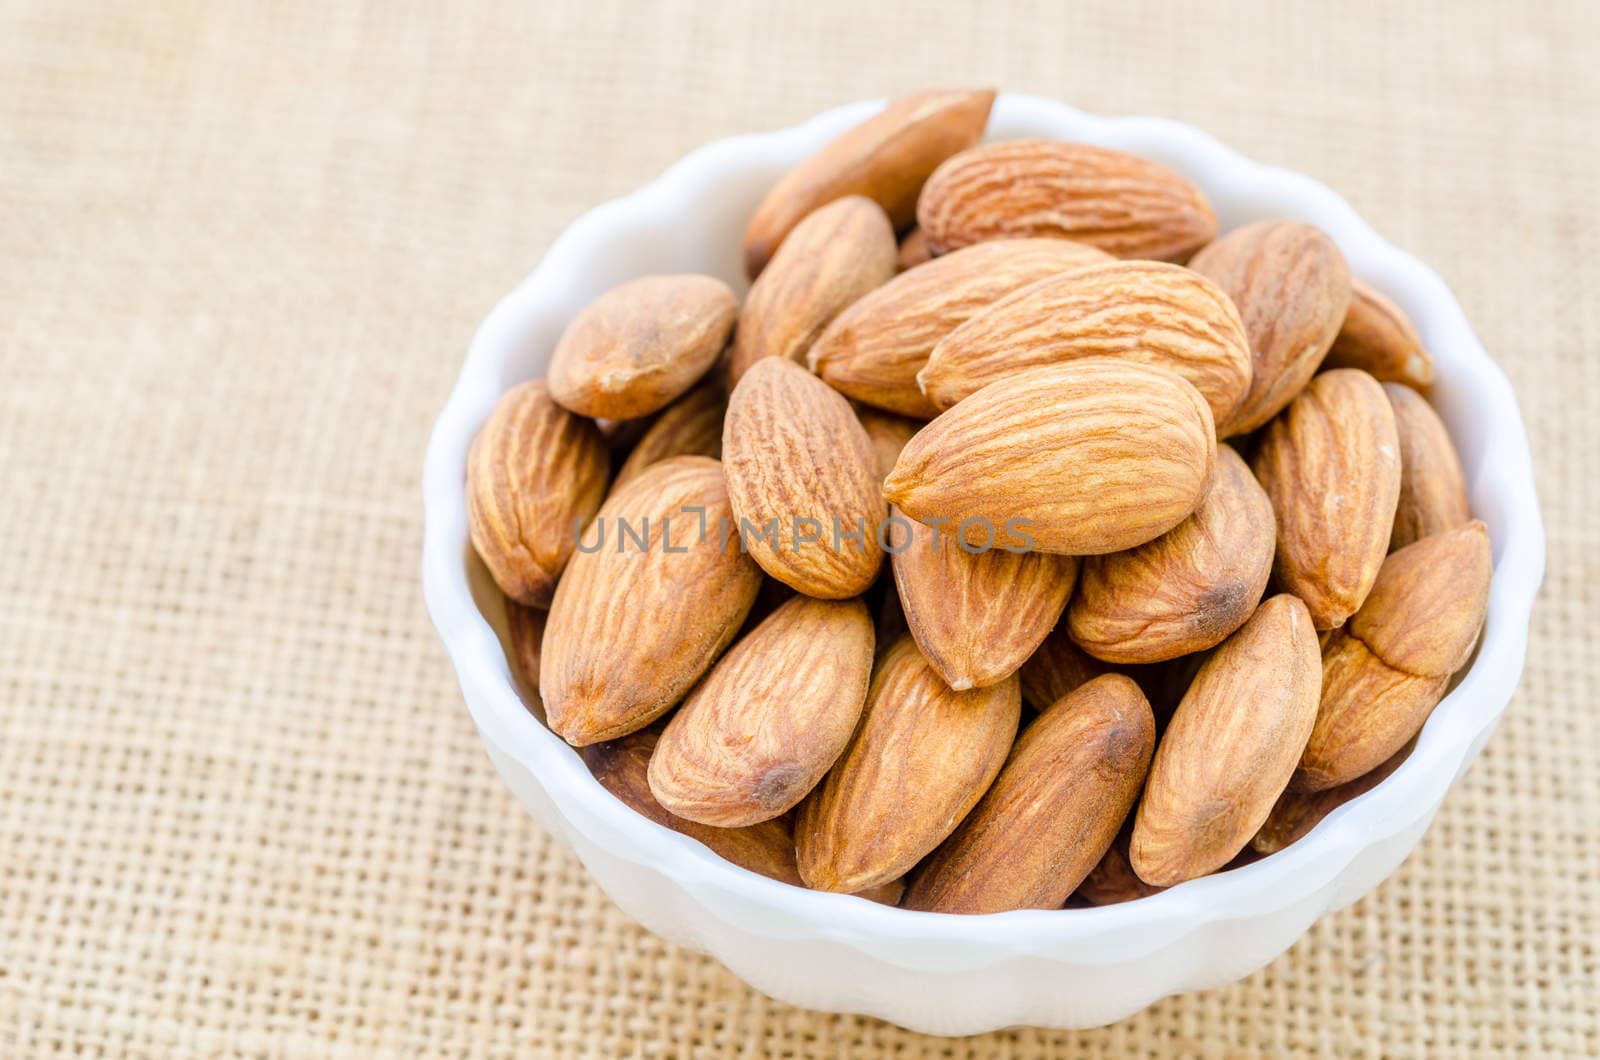 Almonds in white cup. by Gamjai